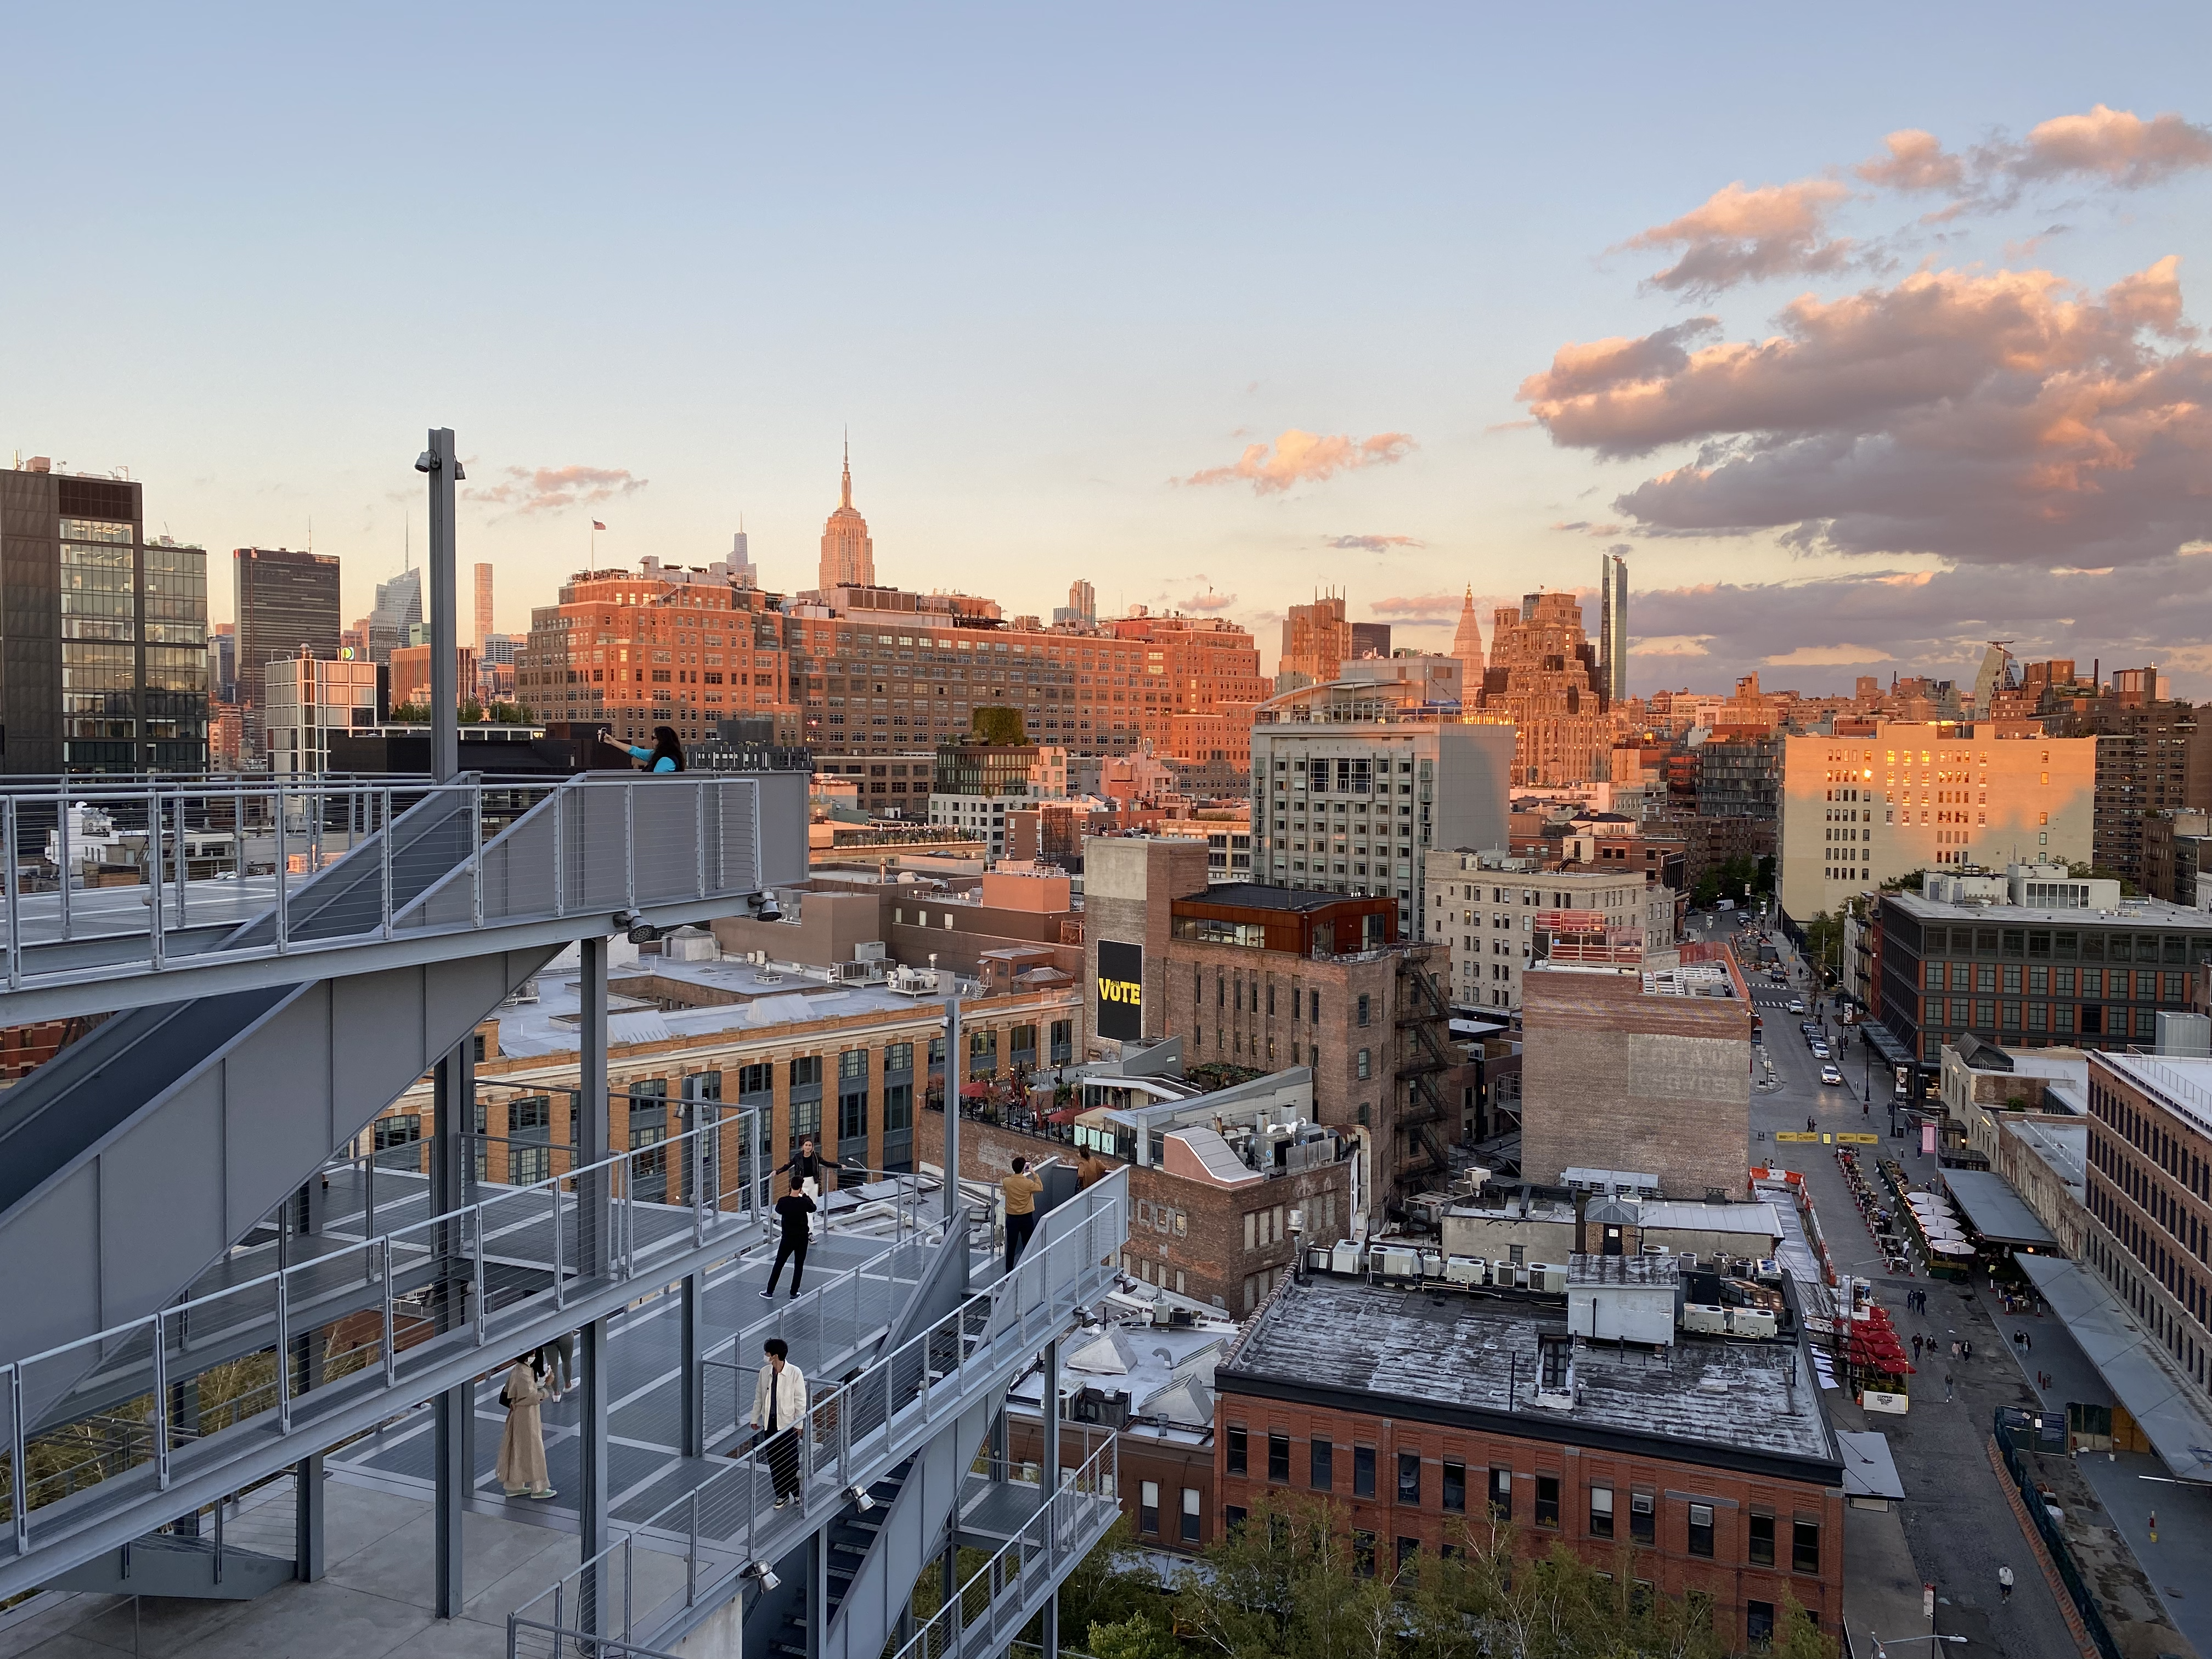 A view of the Manhattan skyline during dusk from one of the balconies of the Whitney Museum.